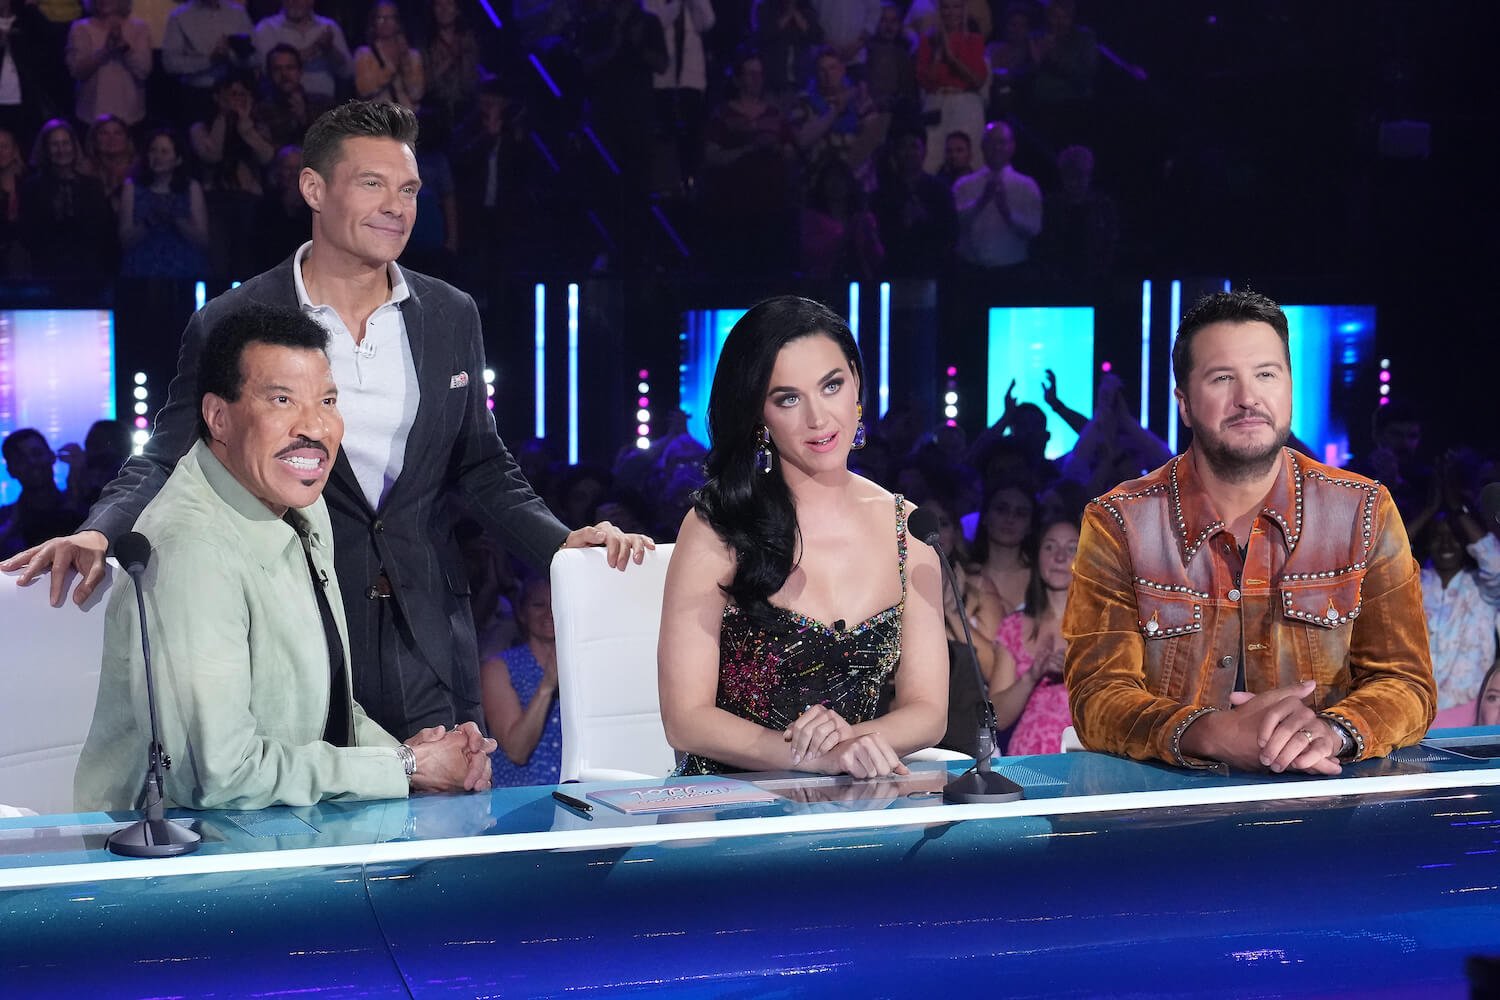 'American Idol' judges Lionel Richie, Katy Perry, and Luke Bryan sitting at the judging table with host Ryan Seacrest behind them